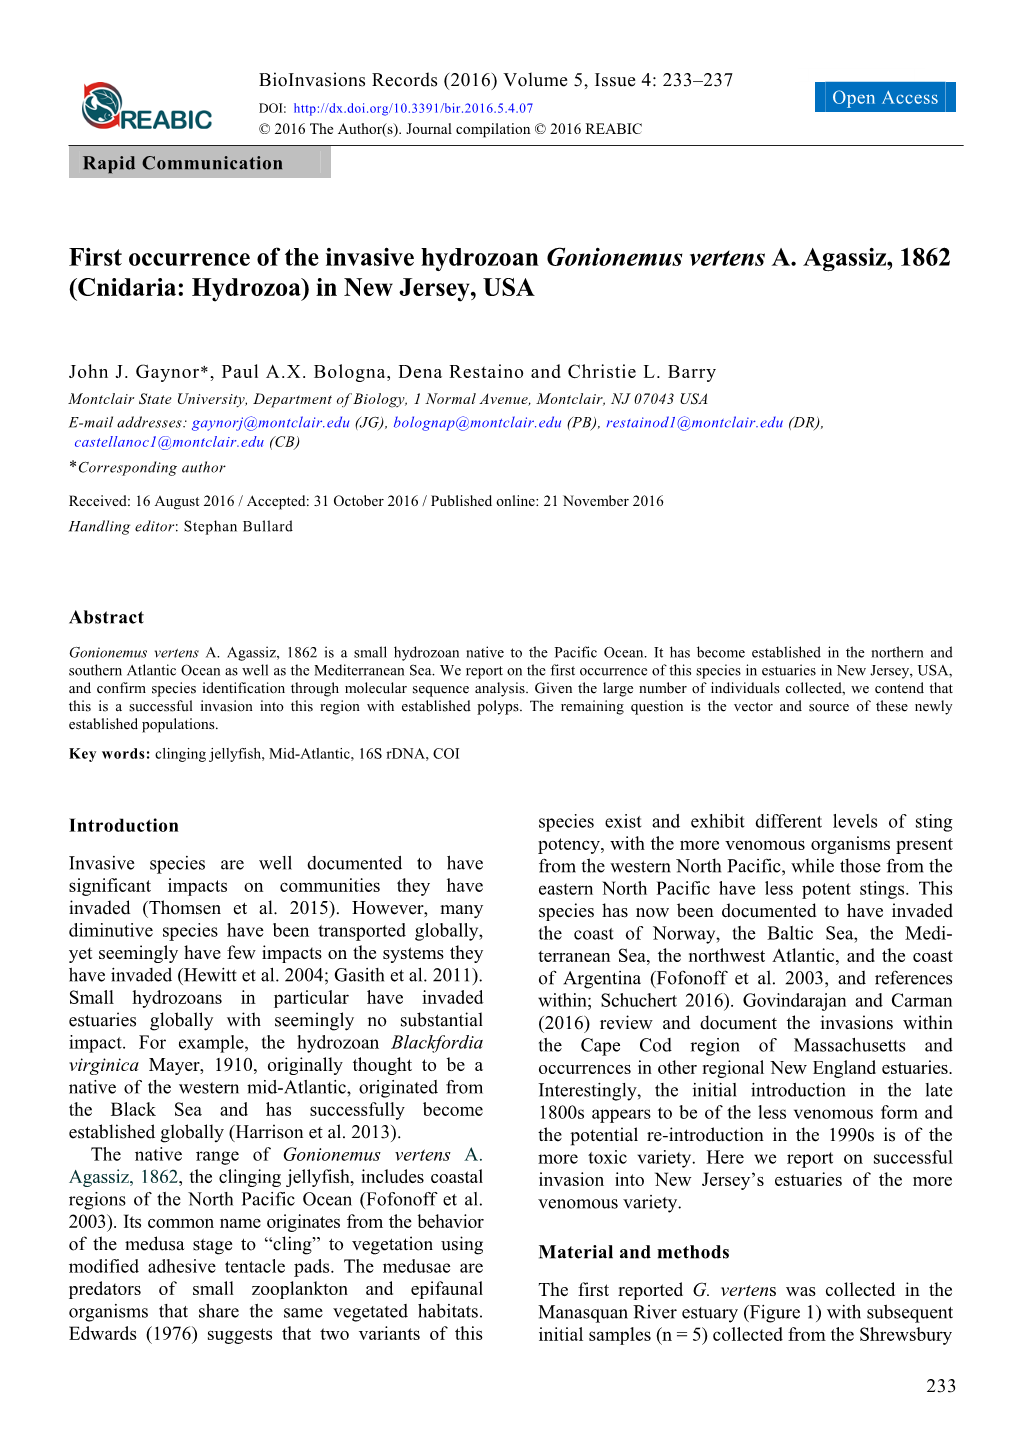 First Occurrence of the Invasive Hydrozoan Gonionemus Vertens A